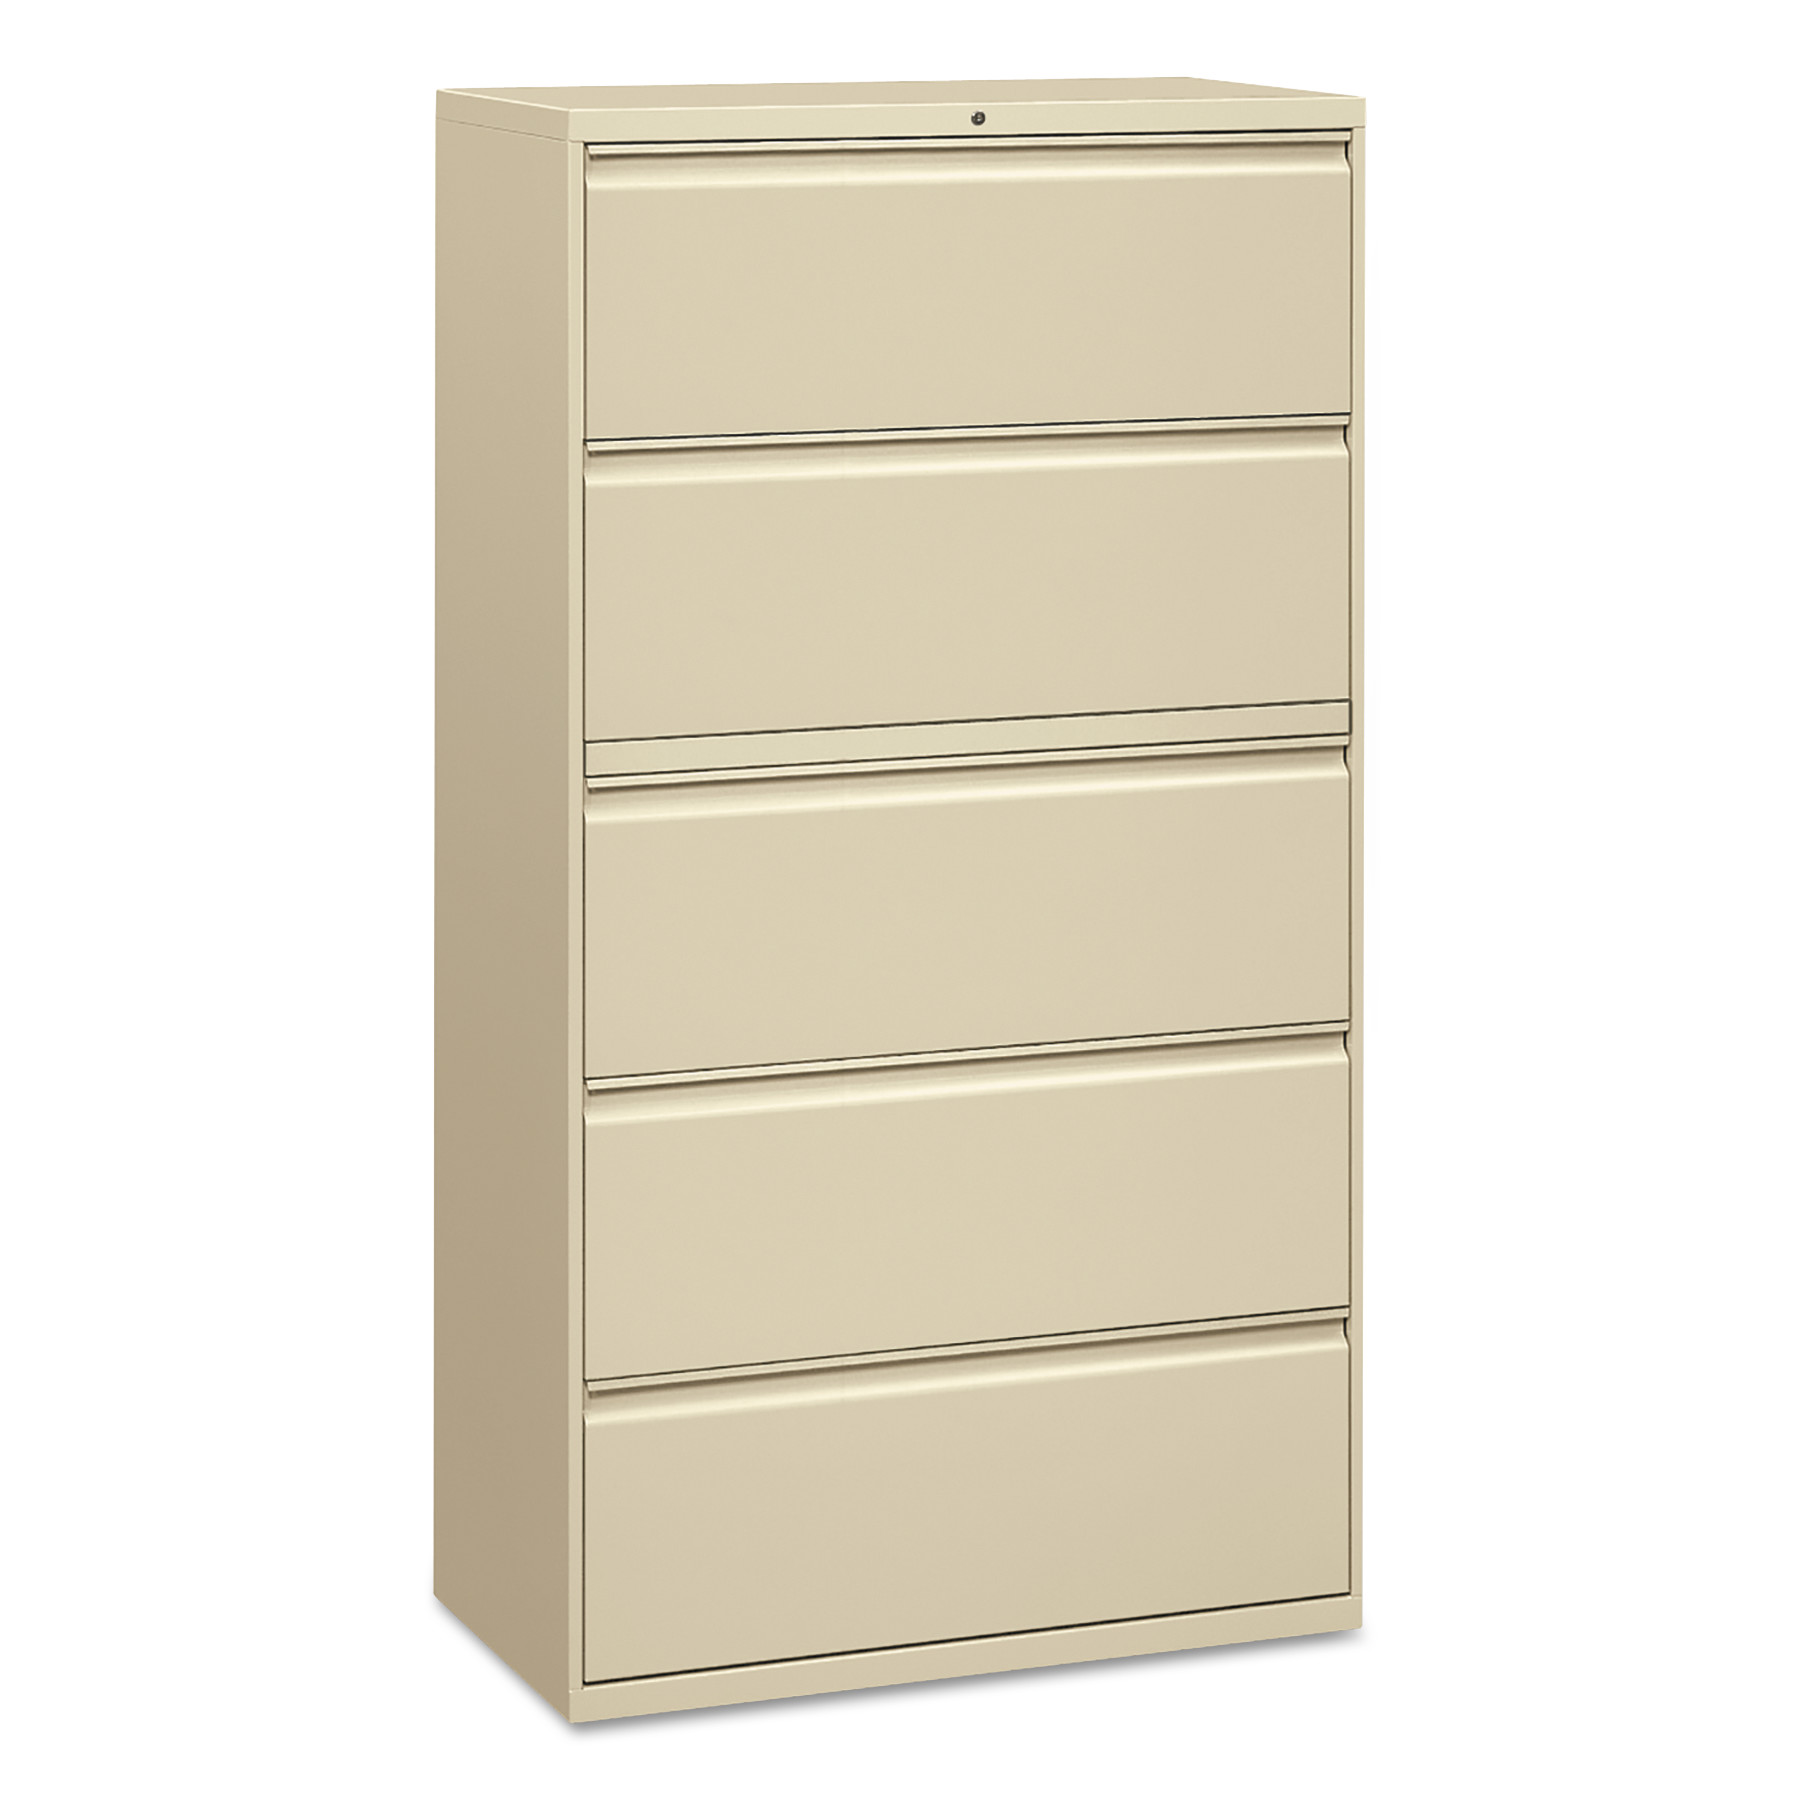 Five-Drawer Lateral File Cabinet, 36w x 18d x 64 1/4h, Putty